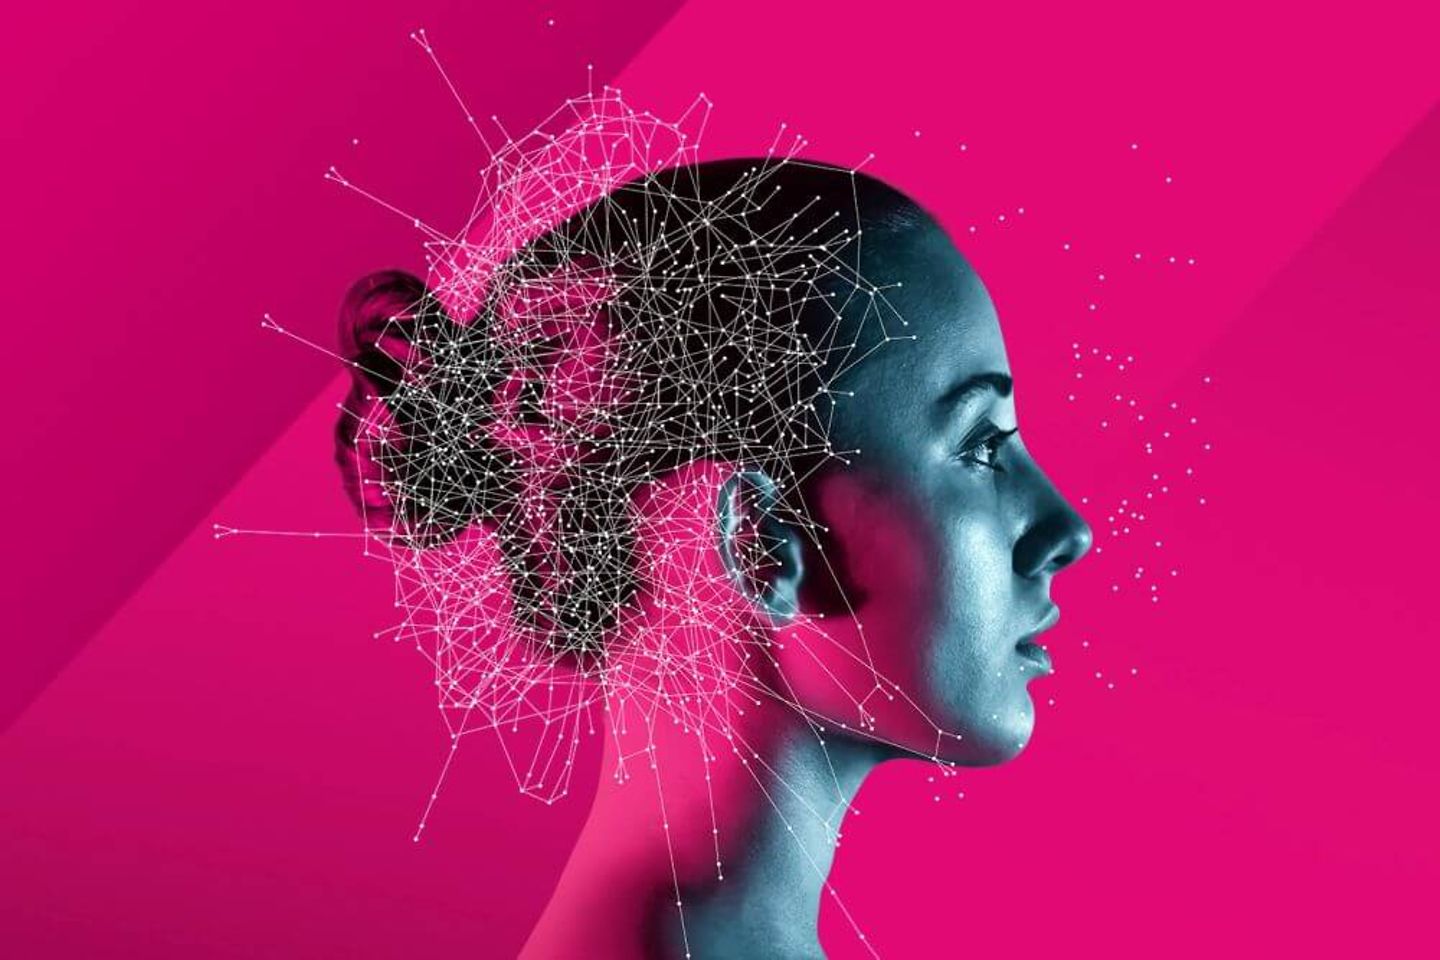 Representation of human and machine become one by means of a woman's head